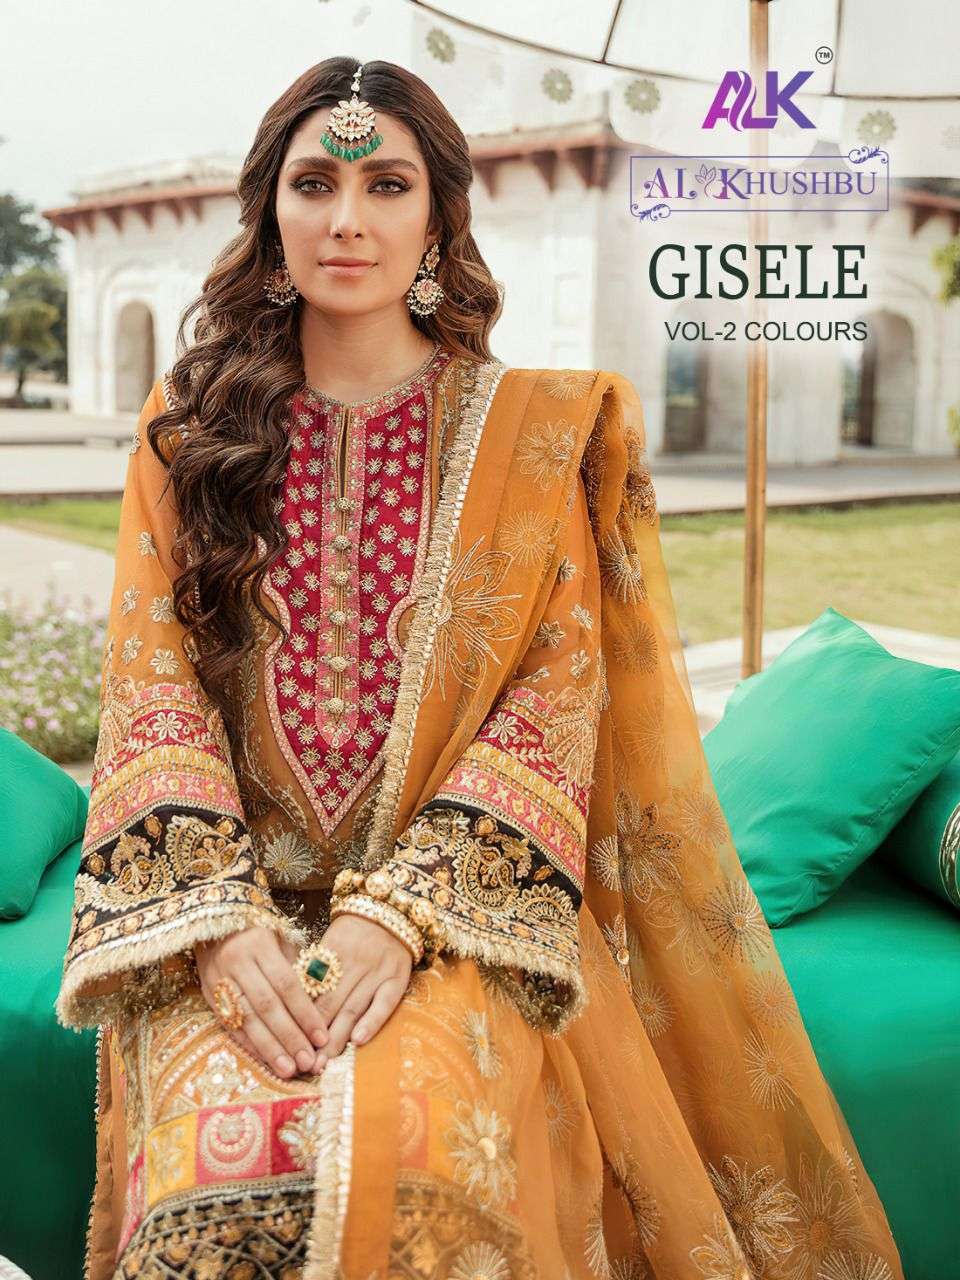 Khushbu Gisele vol 2 Georgette with Embroidery work Pakistan...